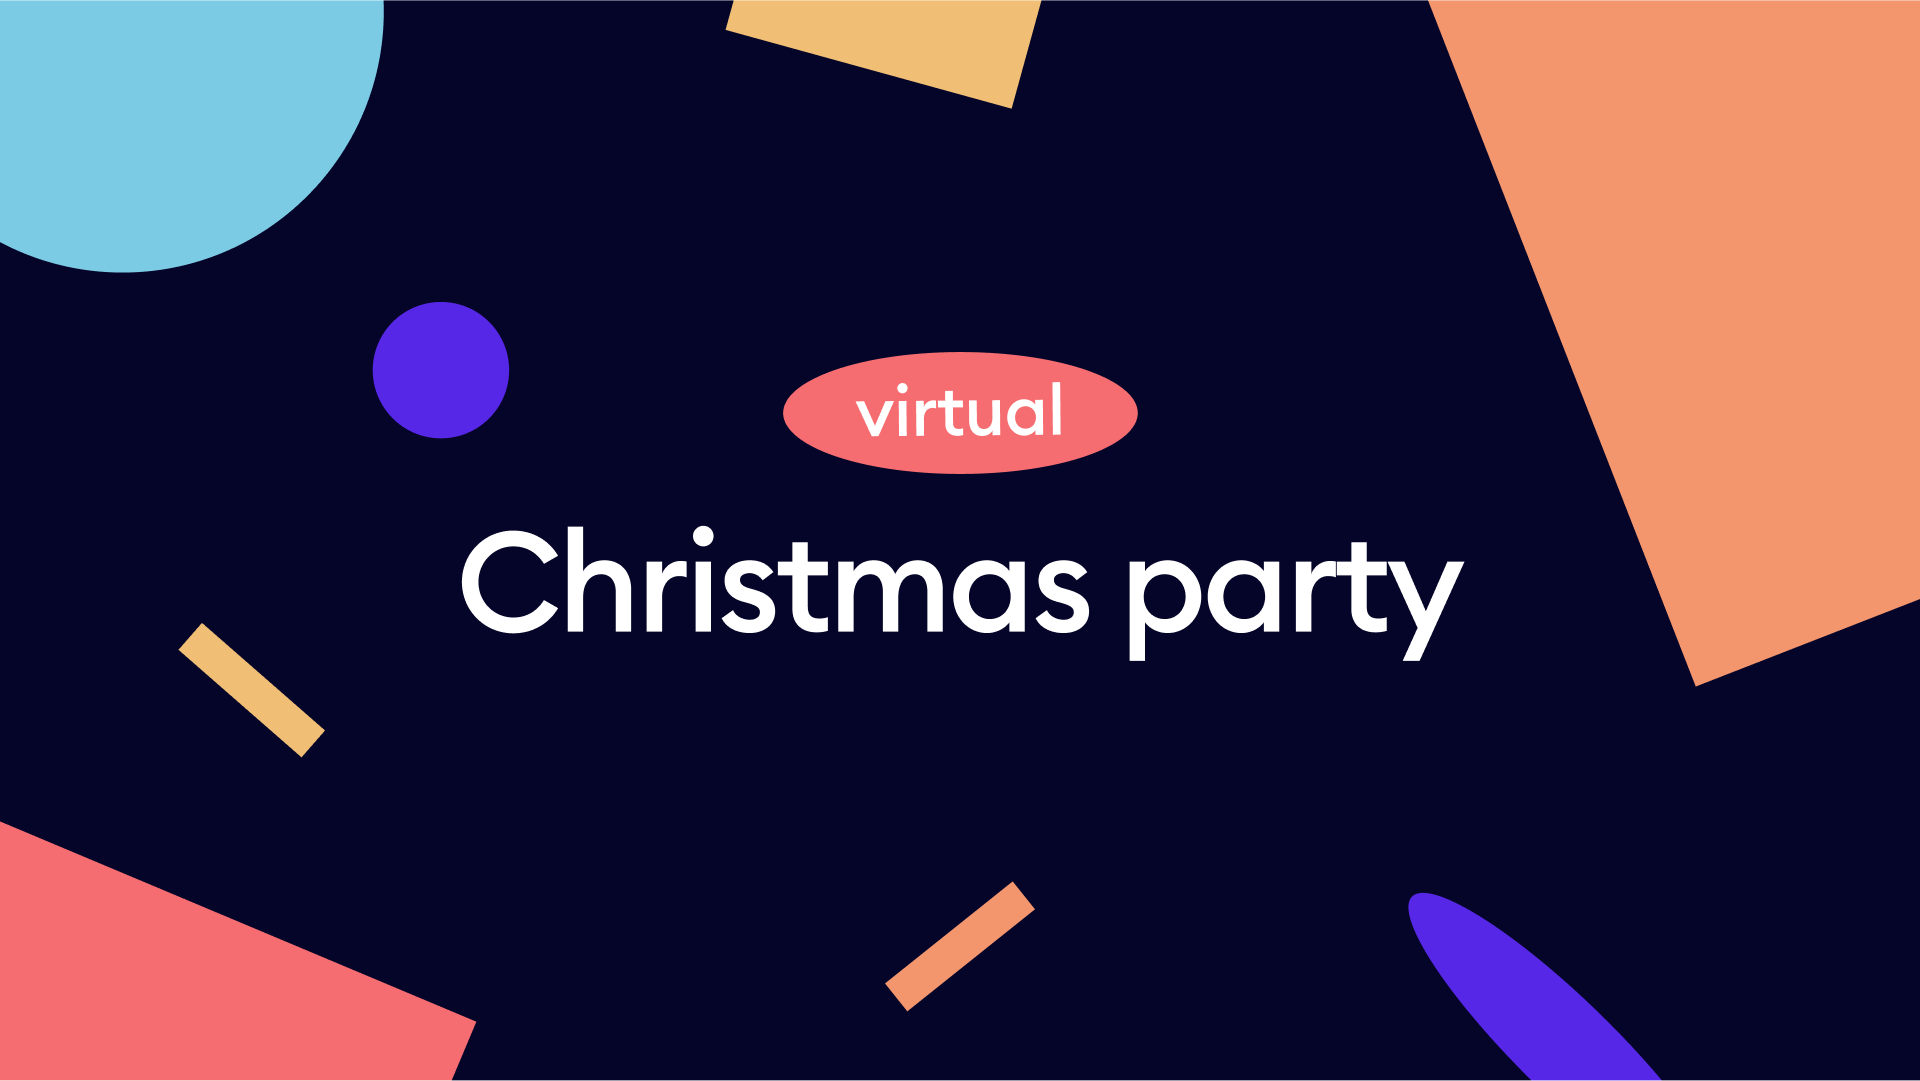 Creating a Festive Virtual Christmas Space in SpatialChat